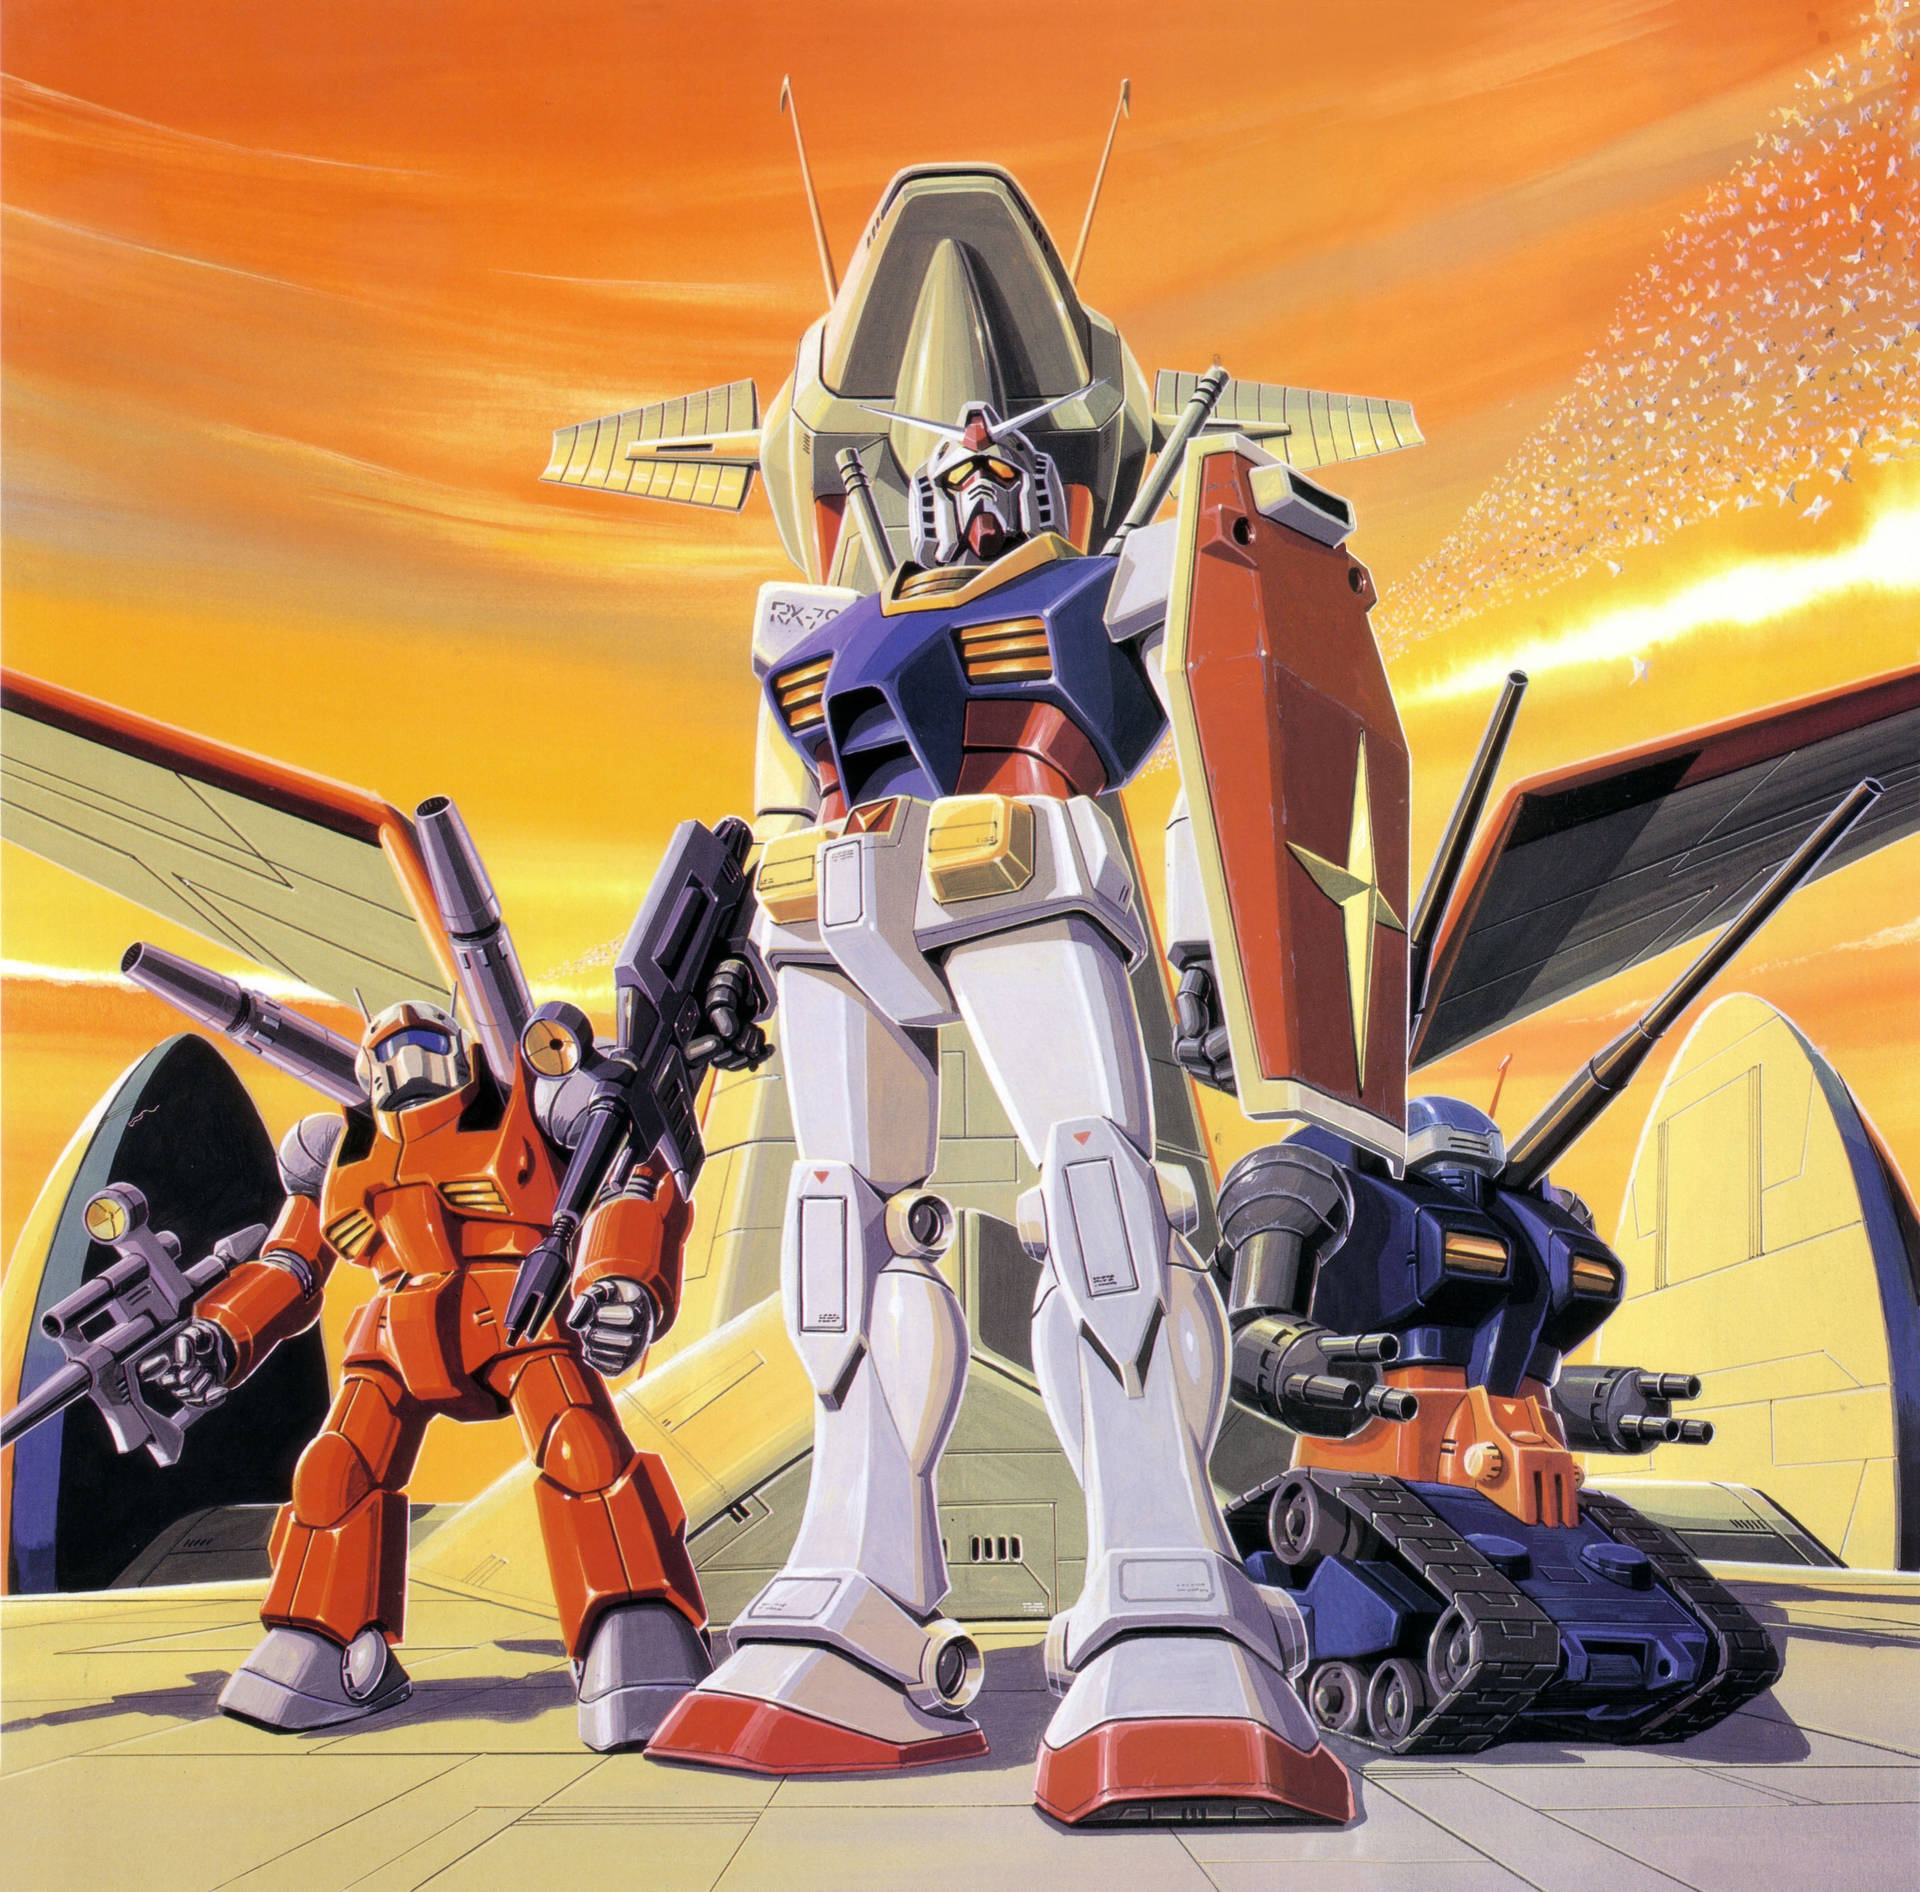 Heroic Alliance - Mobile Suit Gundam And His Team